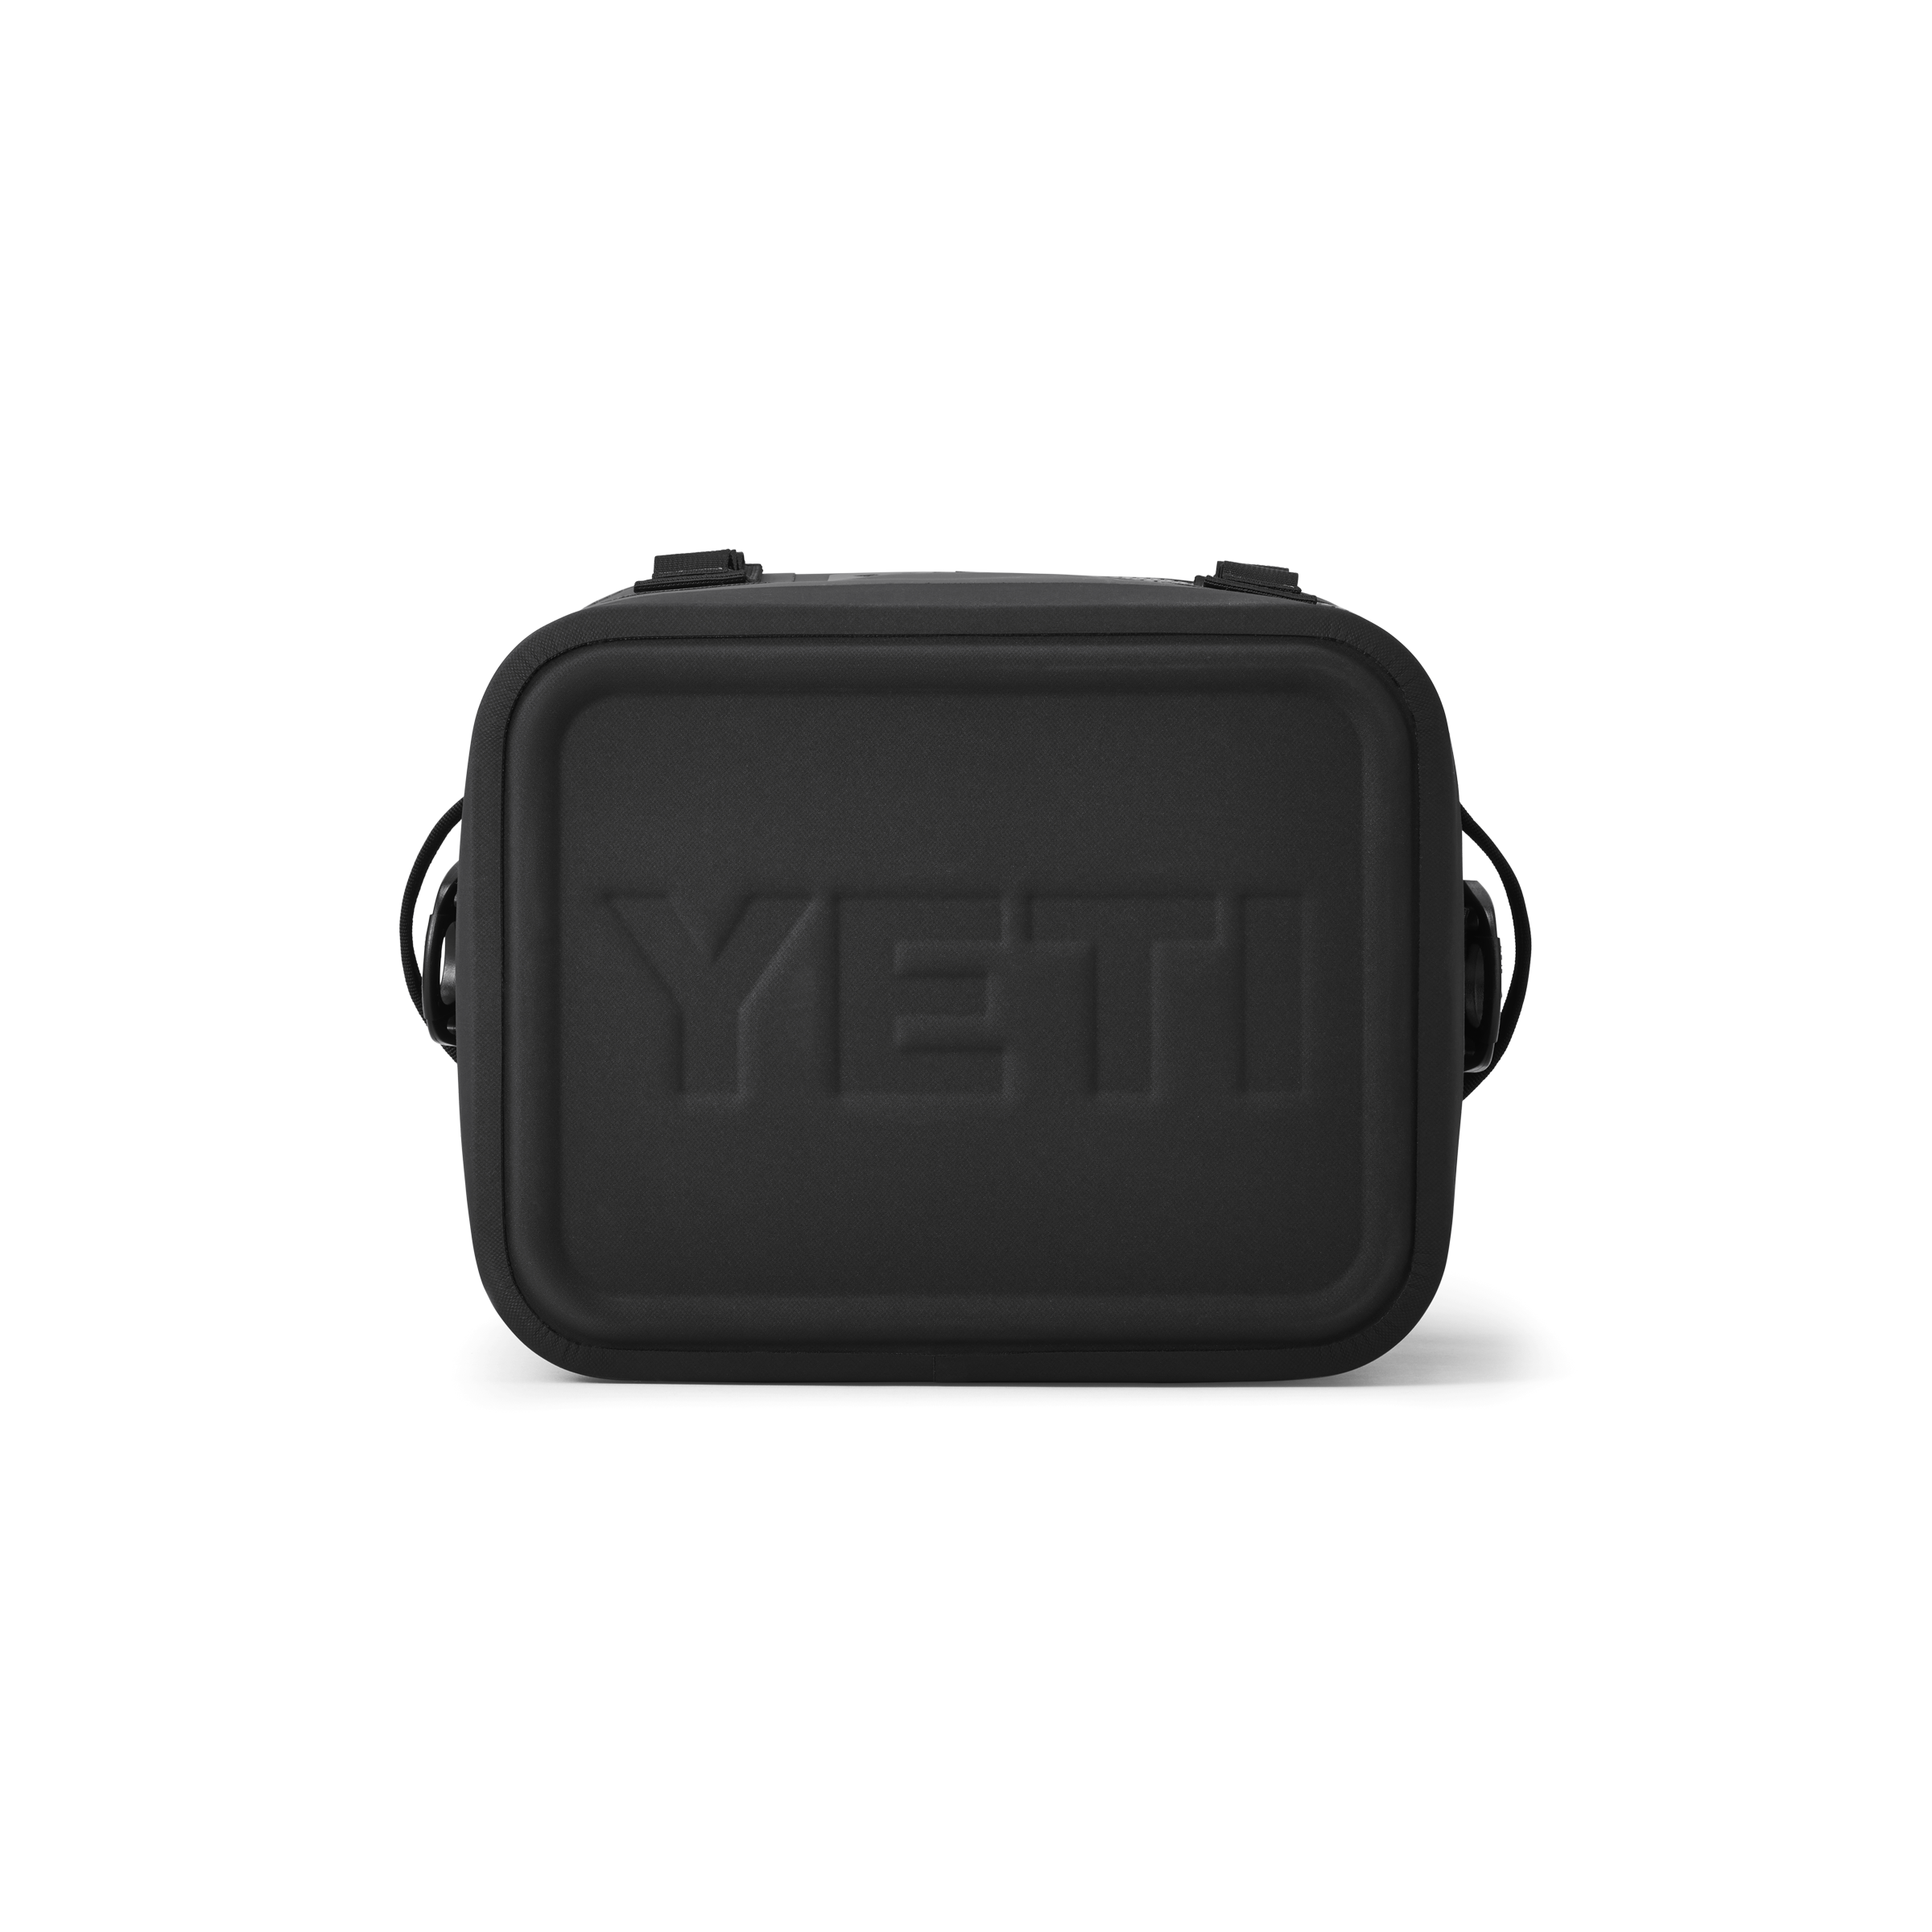 YETI Hopper Flip 12 Insulated Personal Cooler, Highlands Olive in the  Portable Coolers department at